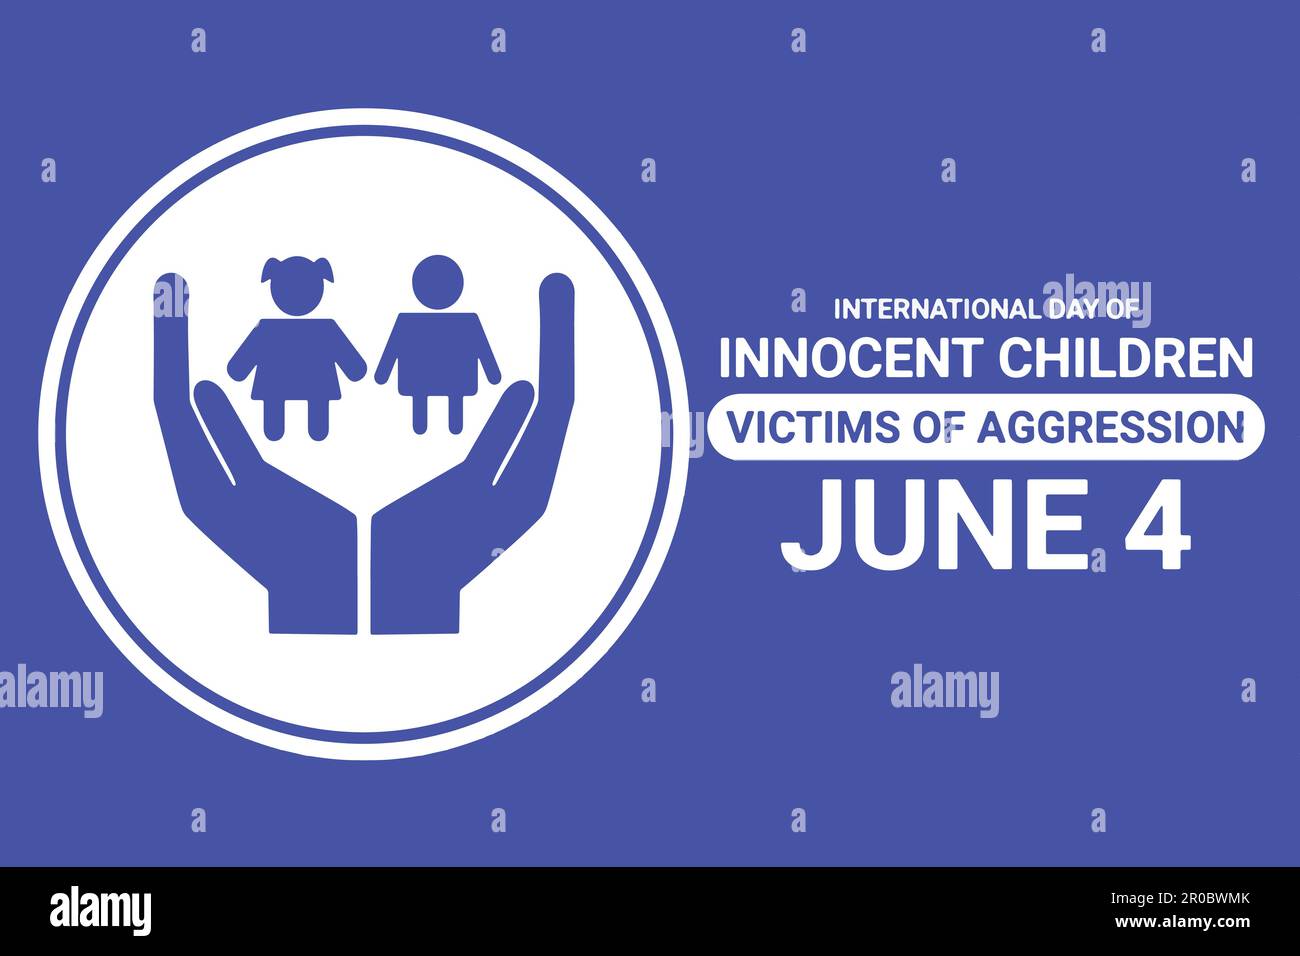 International Day Of Innocent Children Victims Of Aggression. June 4. Holiday concept. Template for background, banner, card, poster Stock Vector